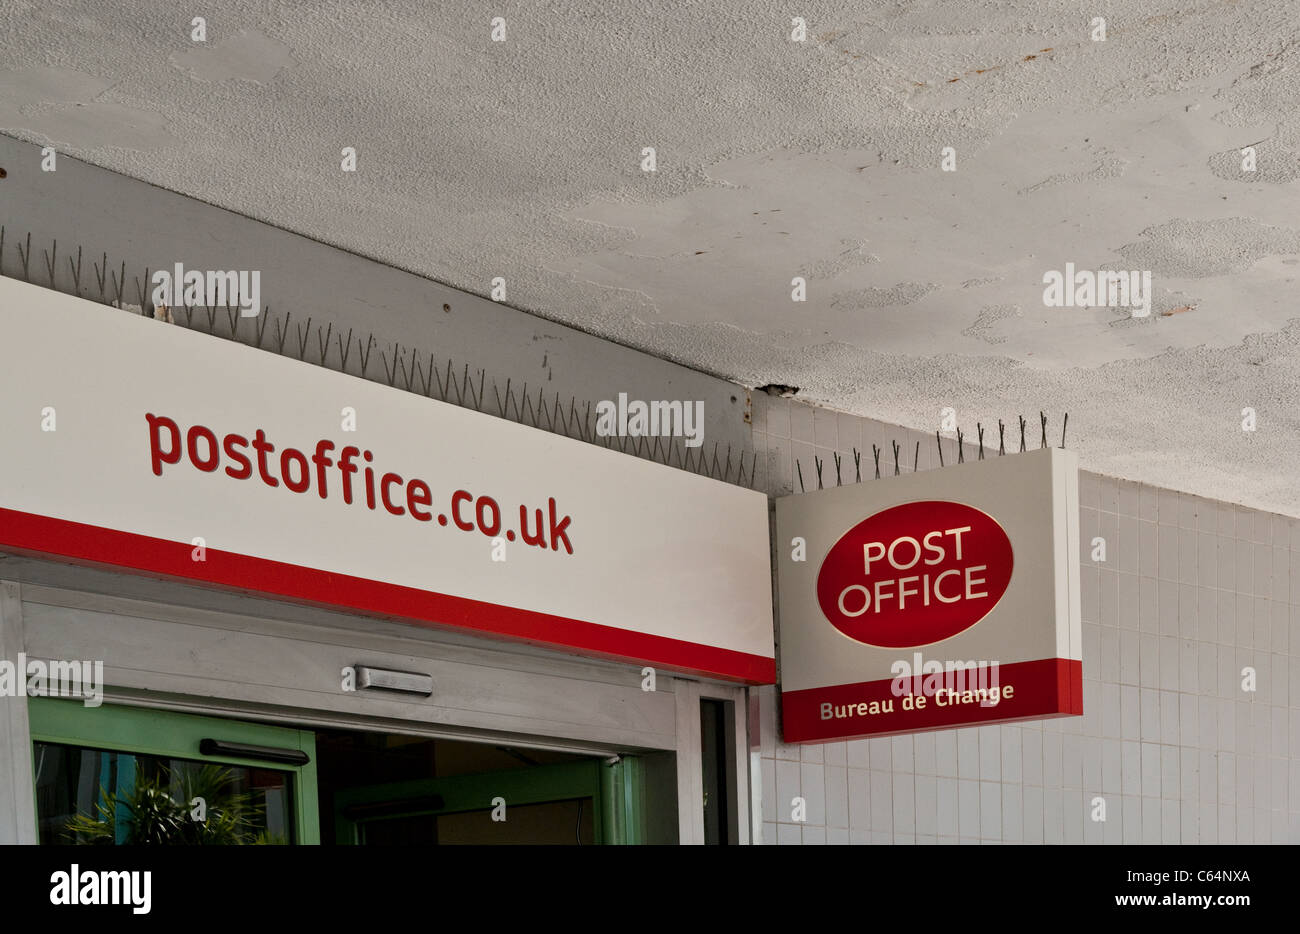 A landscape photograph of the post office sign and web address. Stock Photo